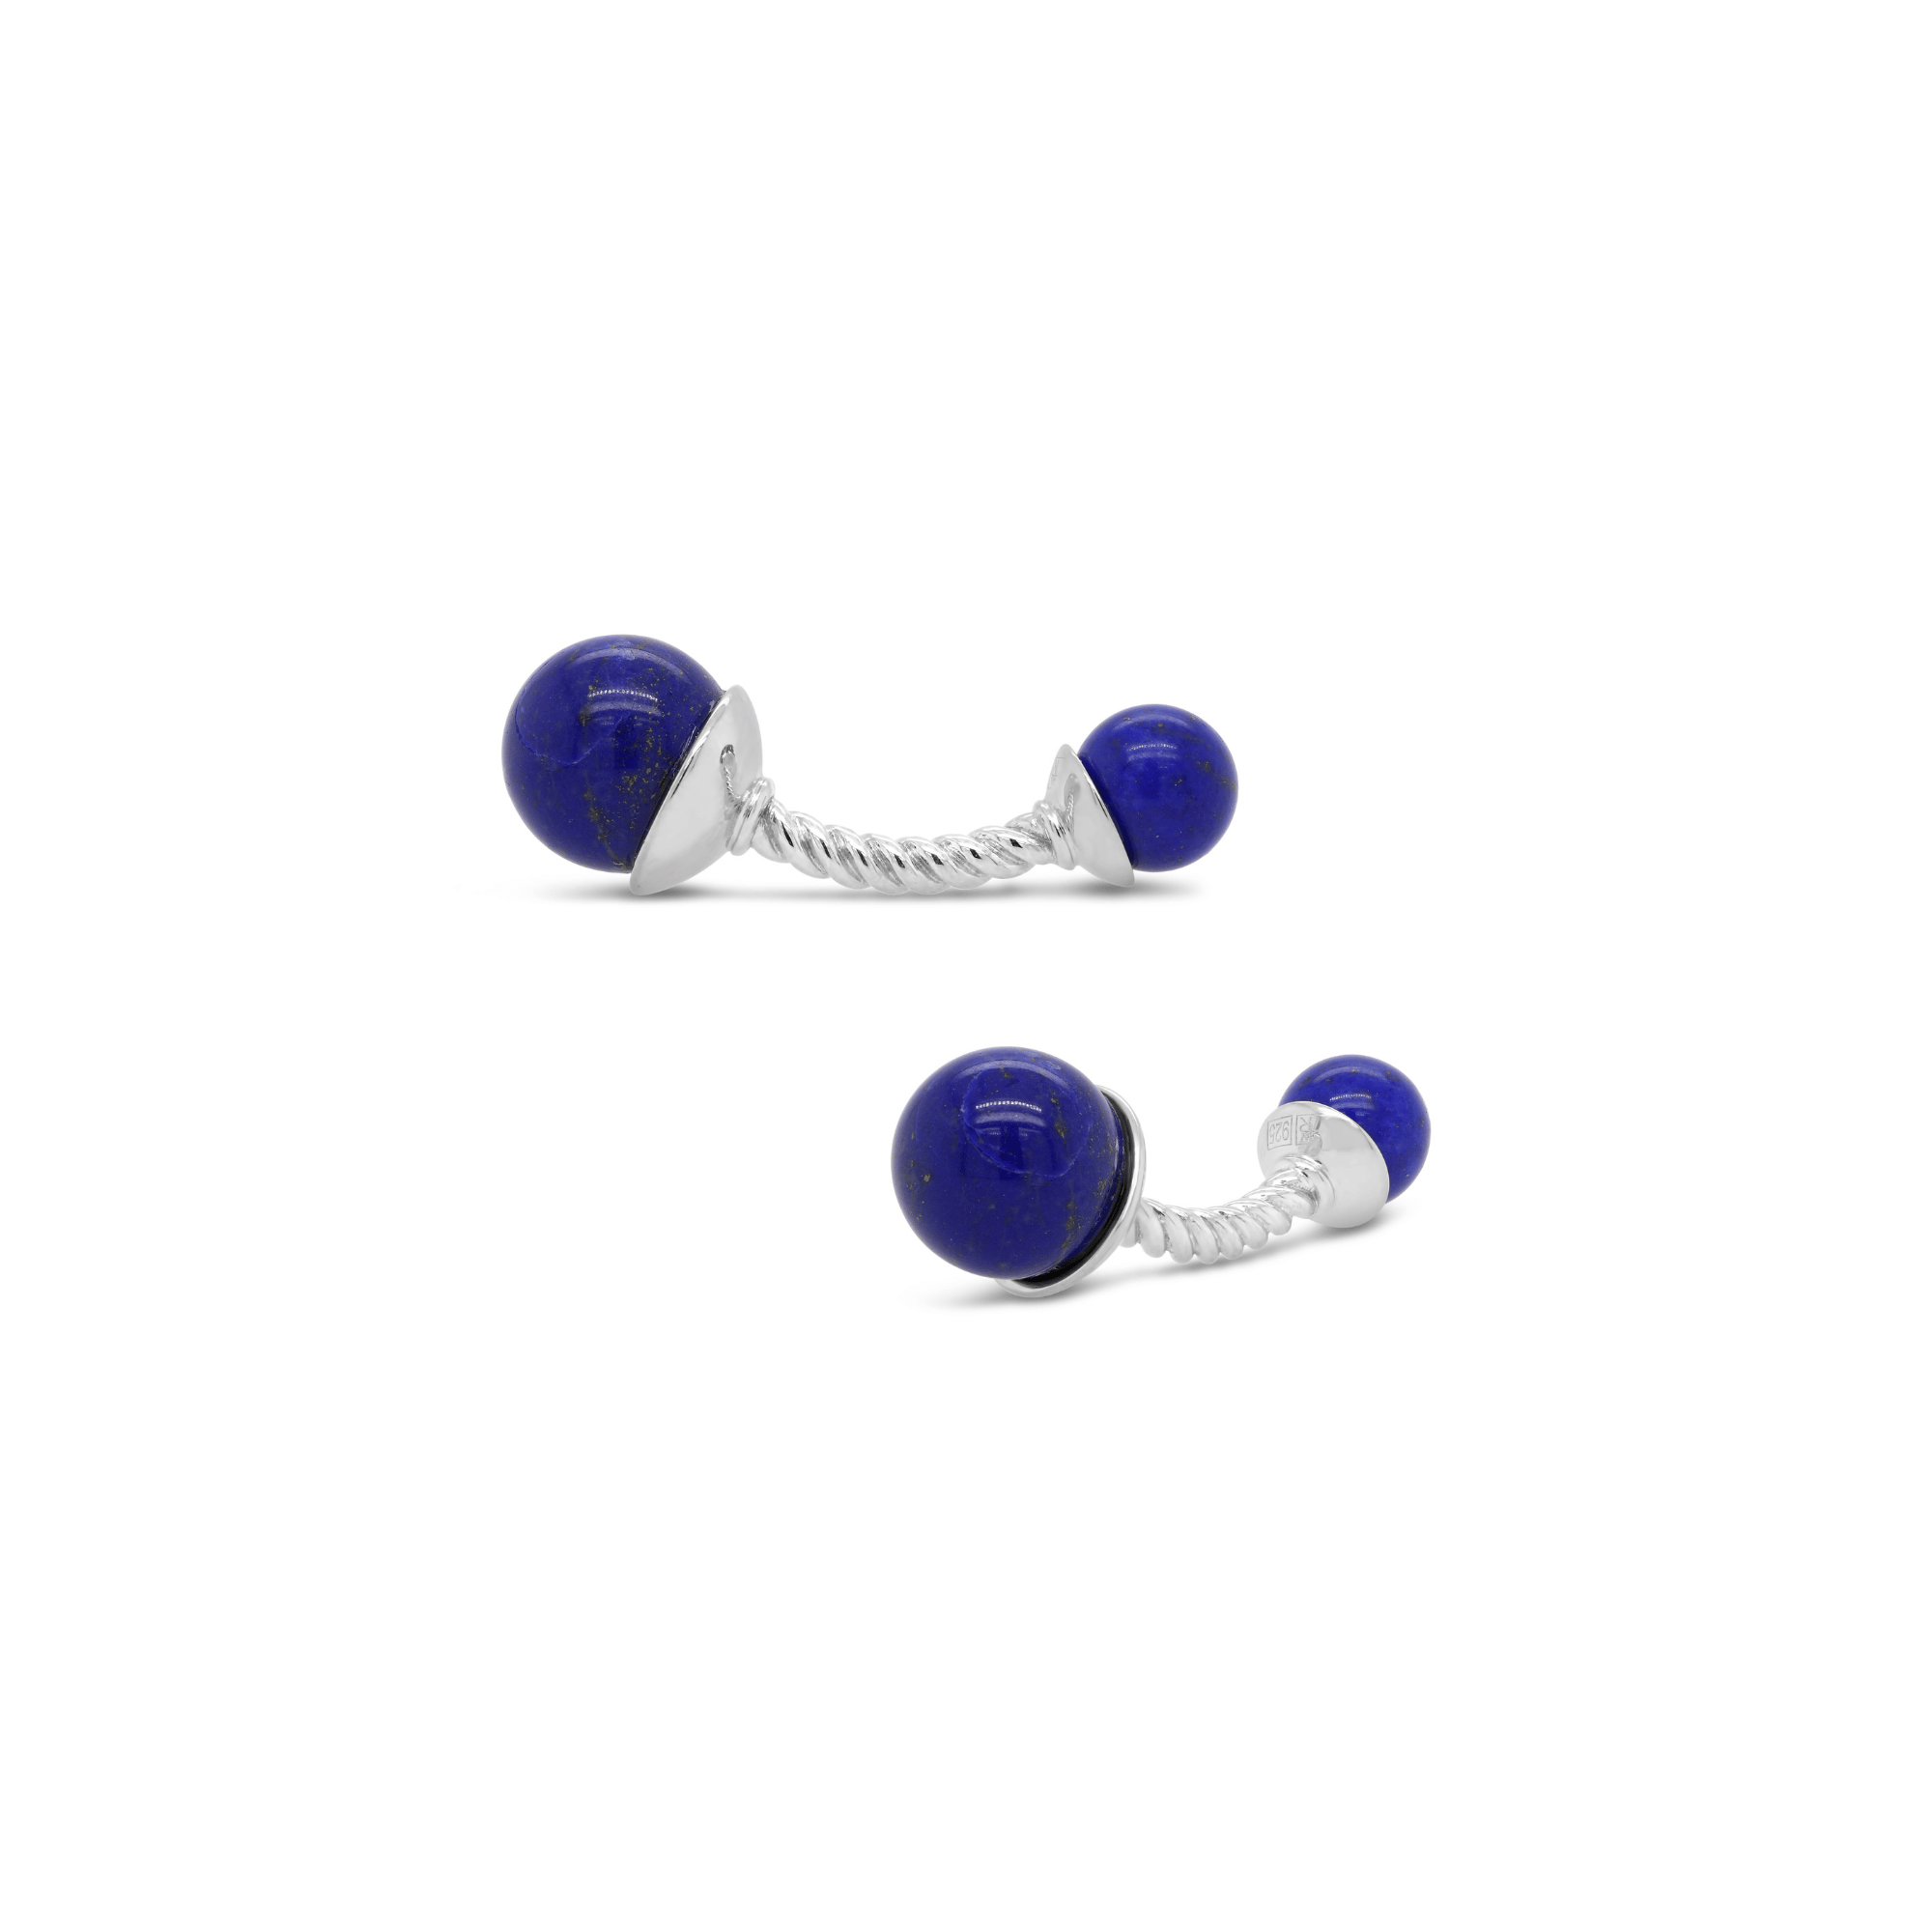 Lapis Lazuli Hercules Cufflinks - 18ct White Gold Plated Sterling Silver